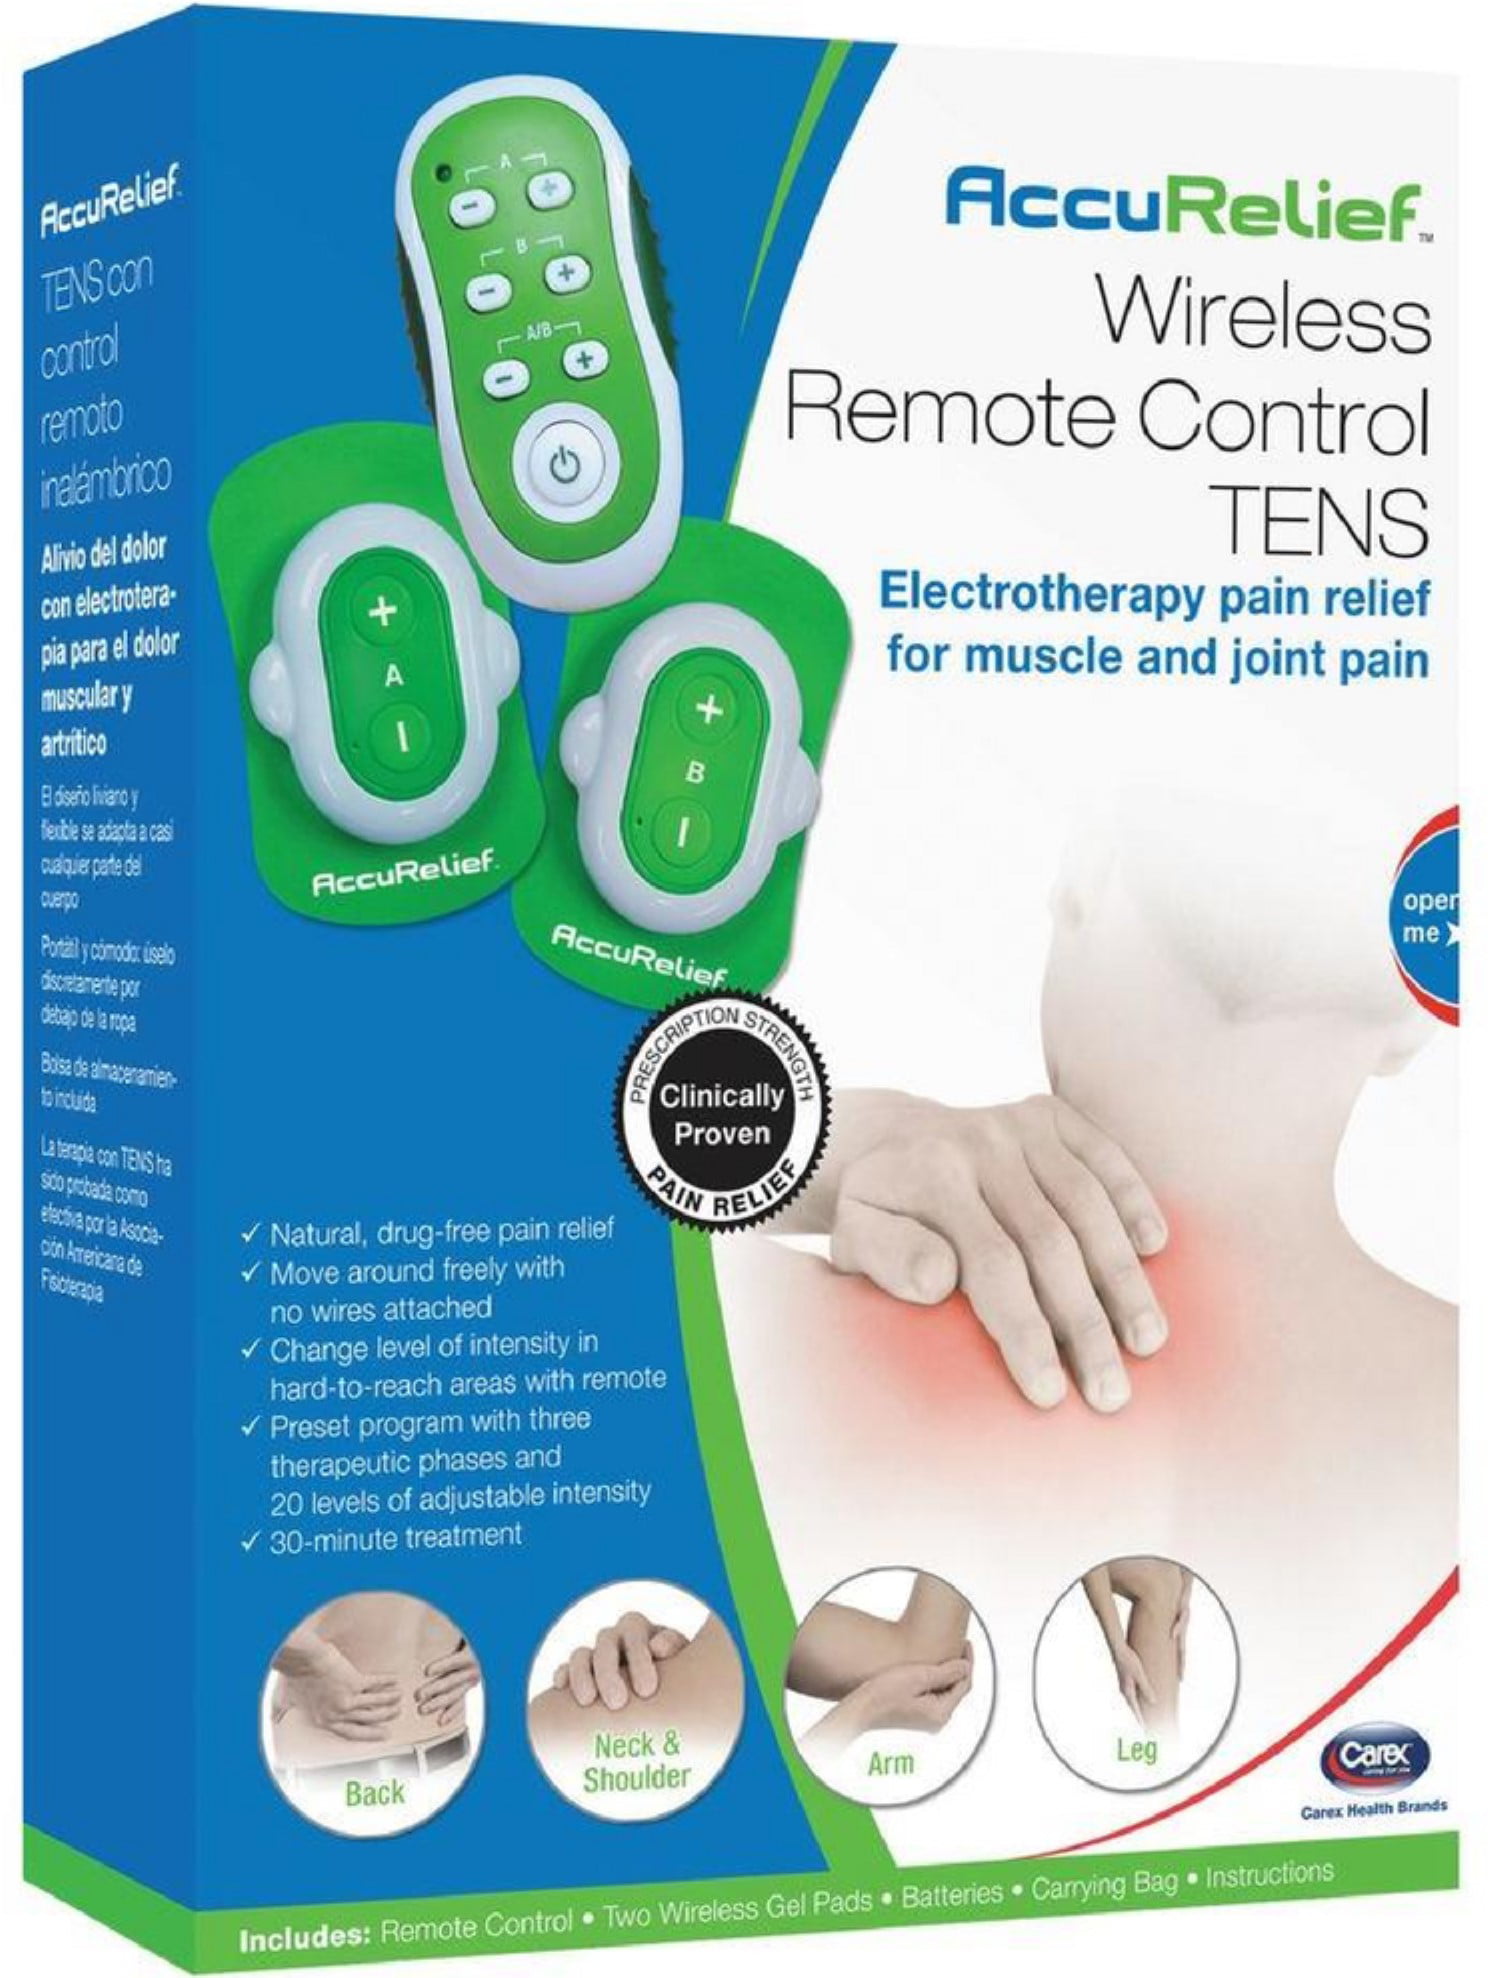 Carex AccuRelief TENS pain relief system